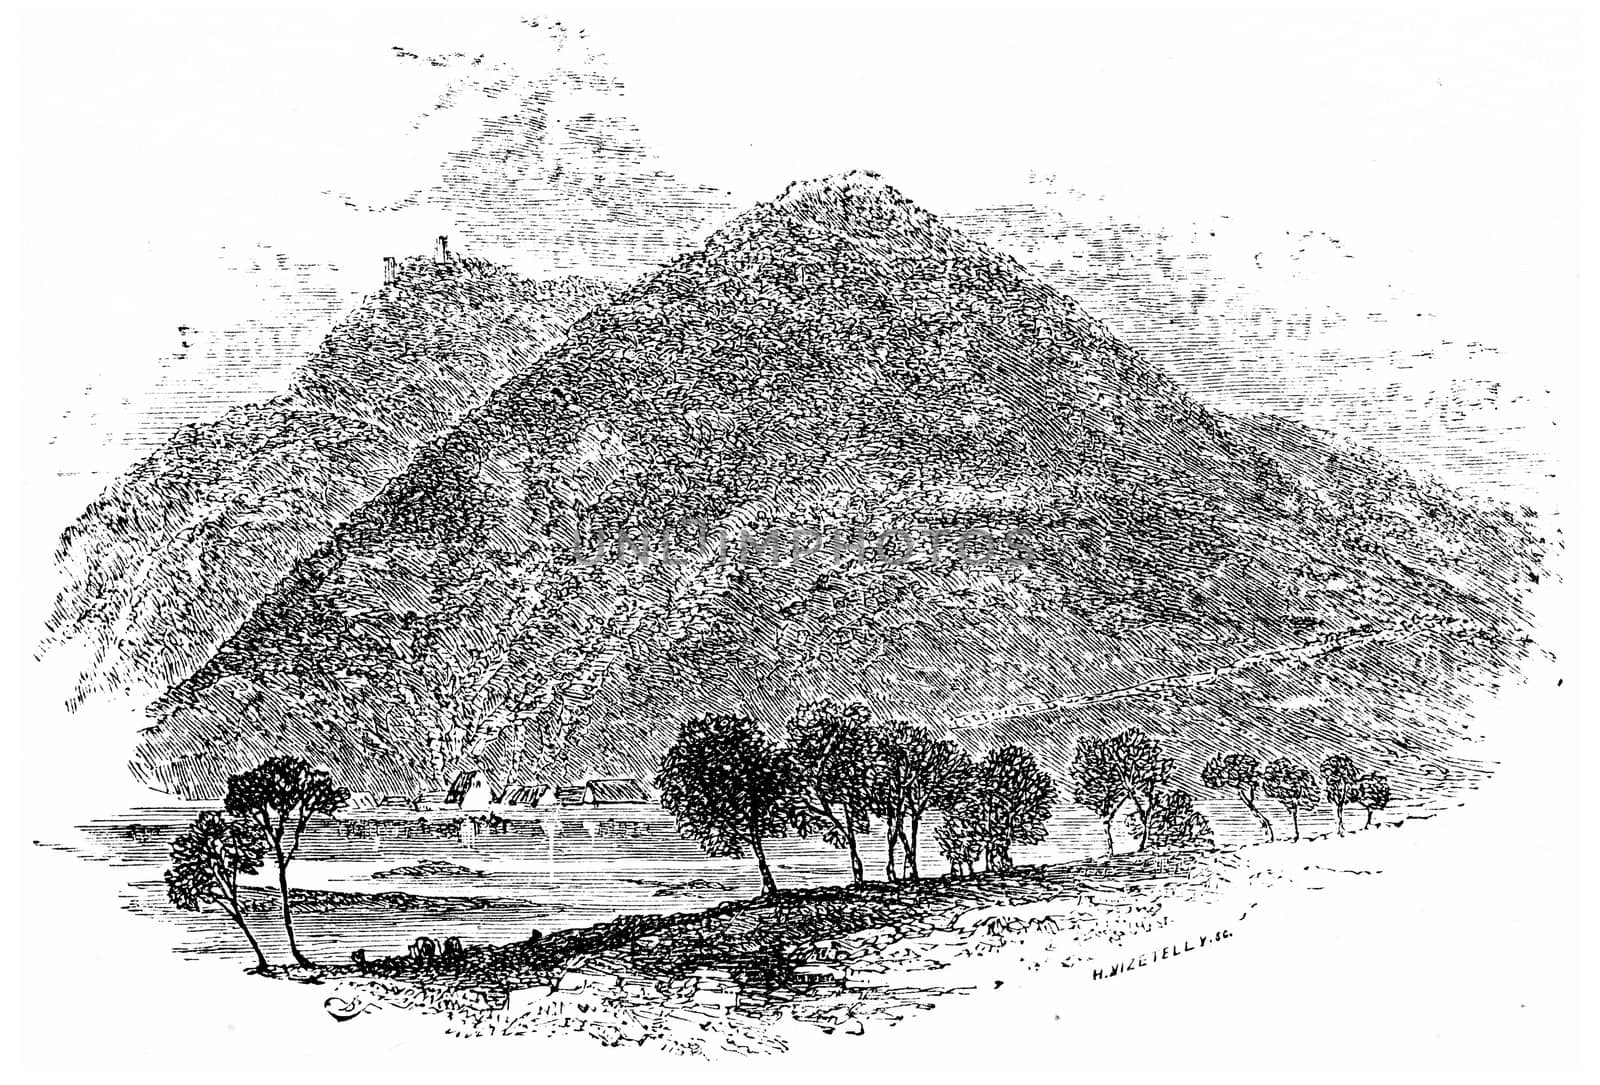 Mountain of All Saints, vintage engraved illustration. From Chemin des Ecoliers, 1861.
